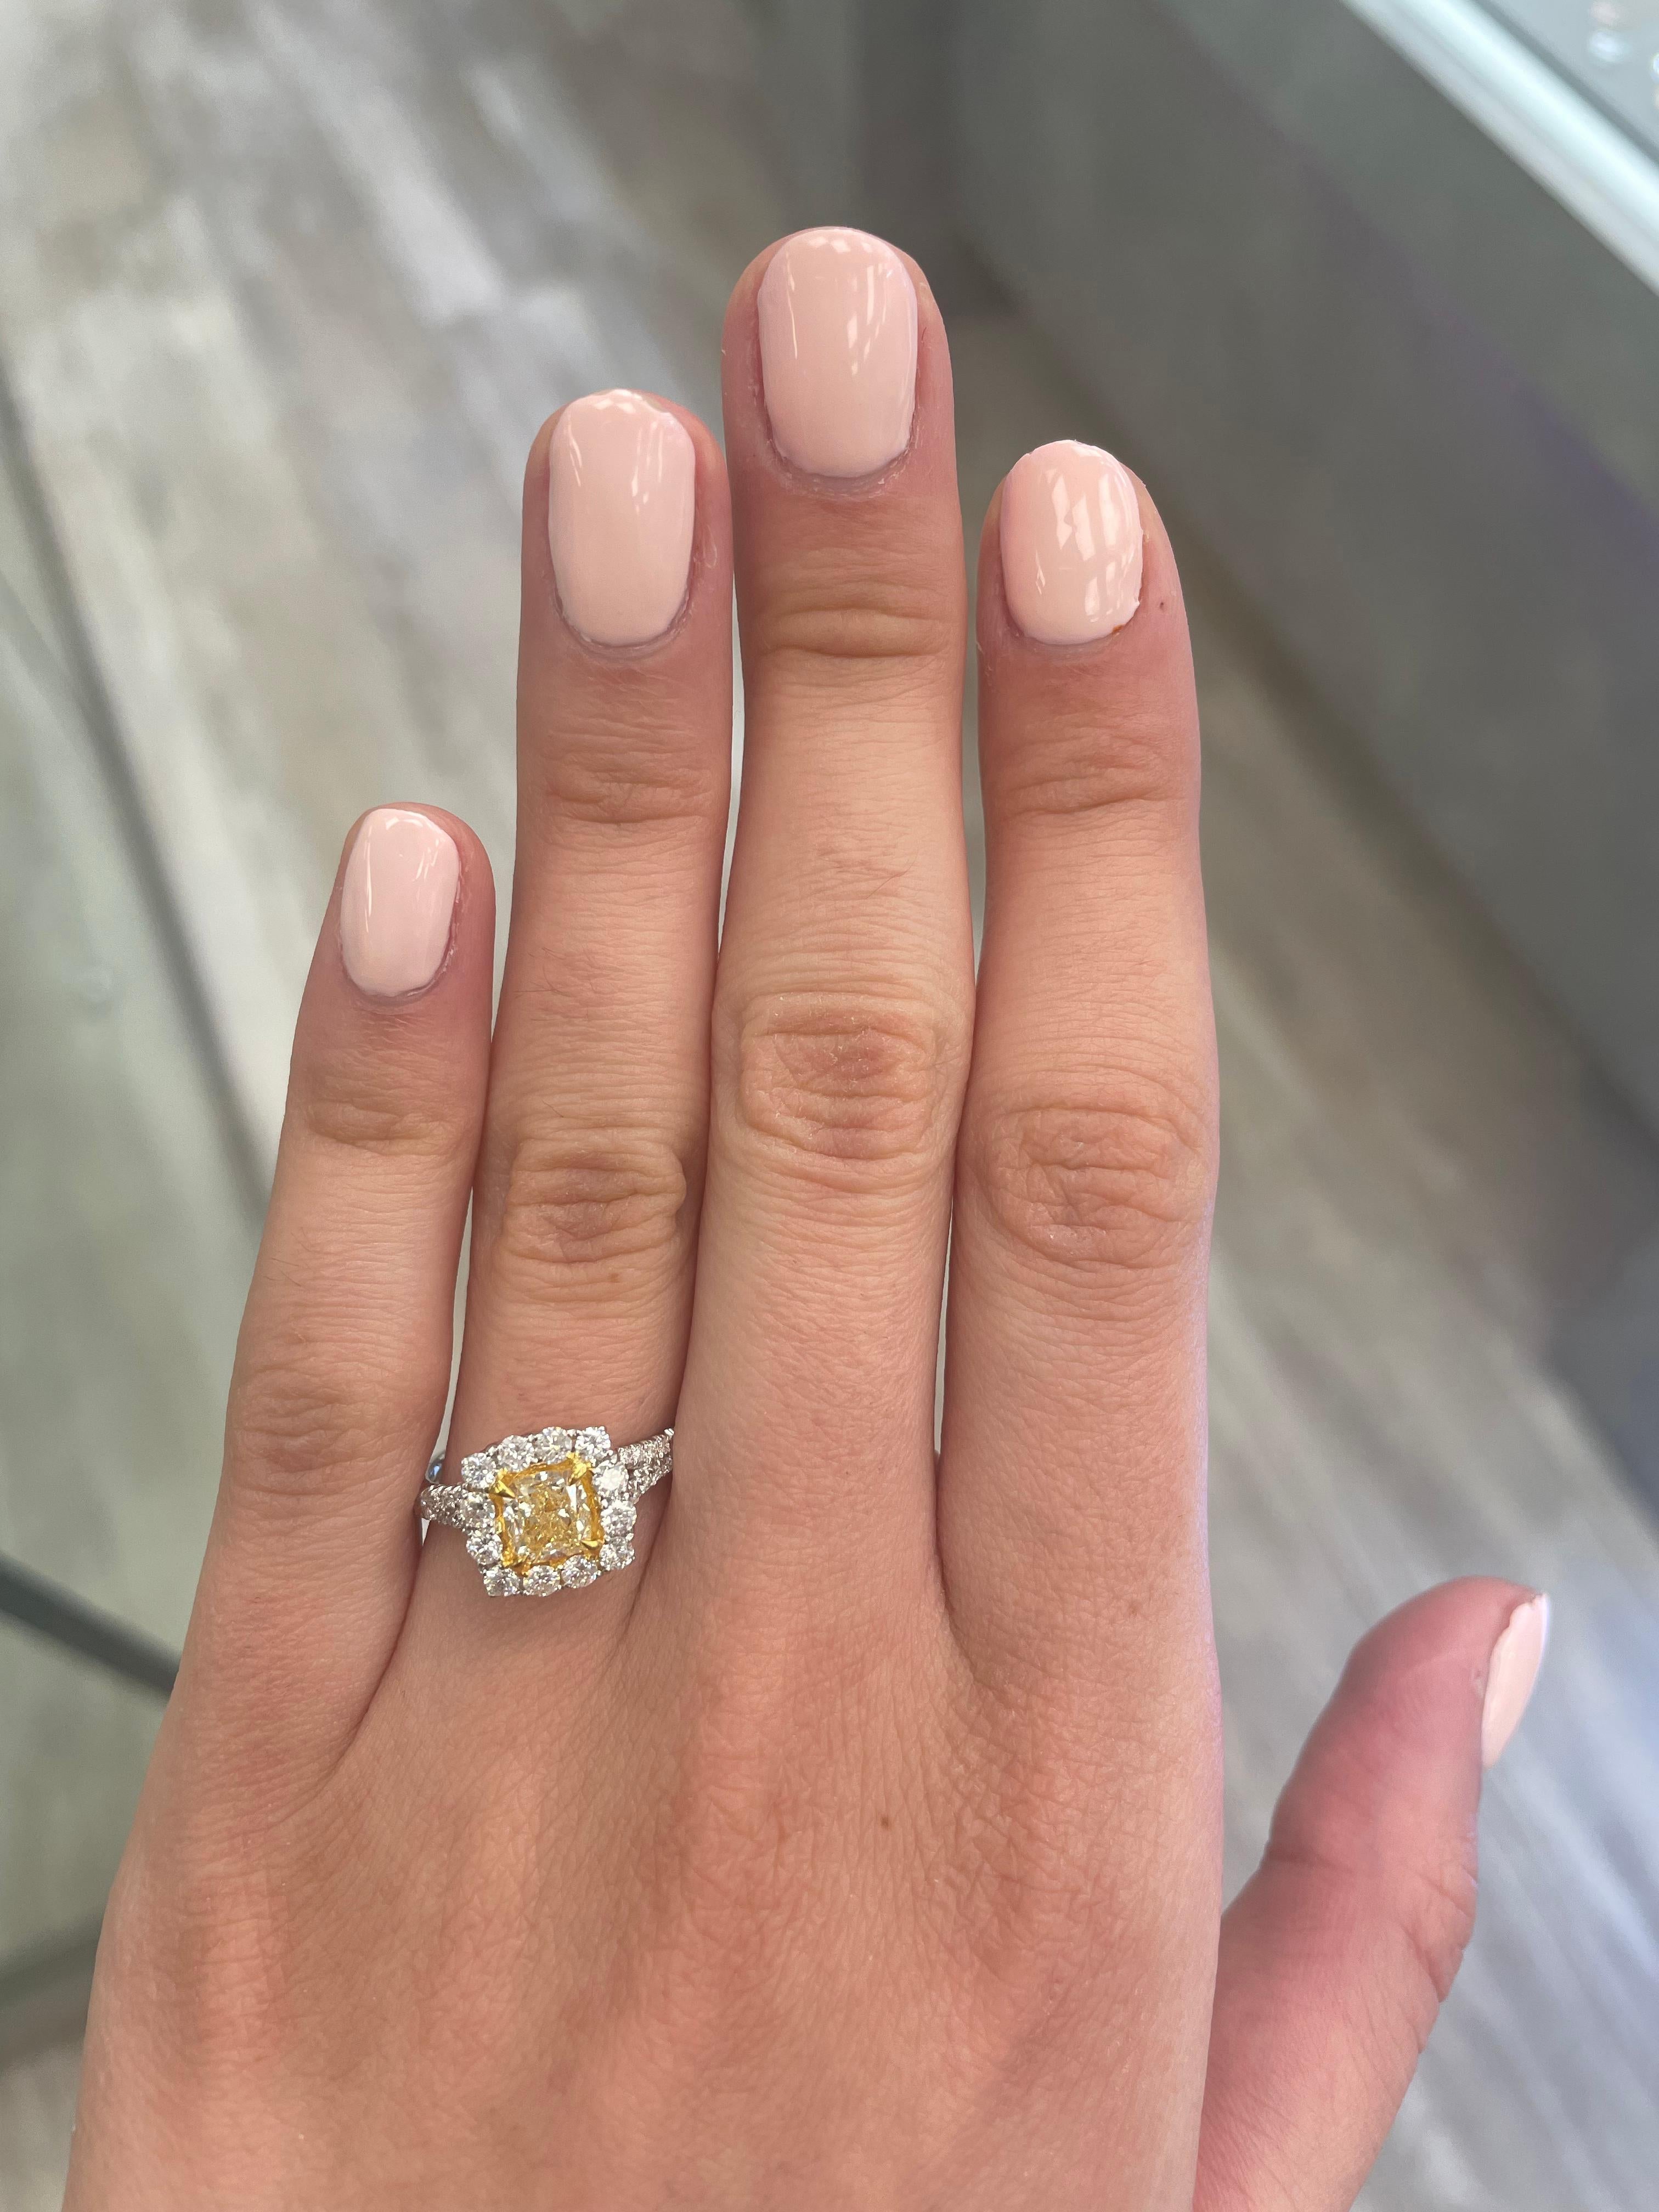 Stunning modern EGL certified yellow diamond with halo ring, two-tone 18k yellow and white gold. By Alexander Beverly Hills
1.75 carats total diamond weight.
1.01 carat cushion cut Fancy Intense Yellow color and VS1 clarity diamond, EGL graded.